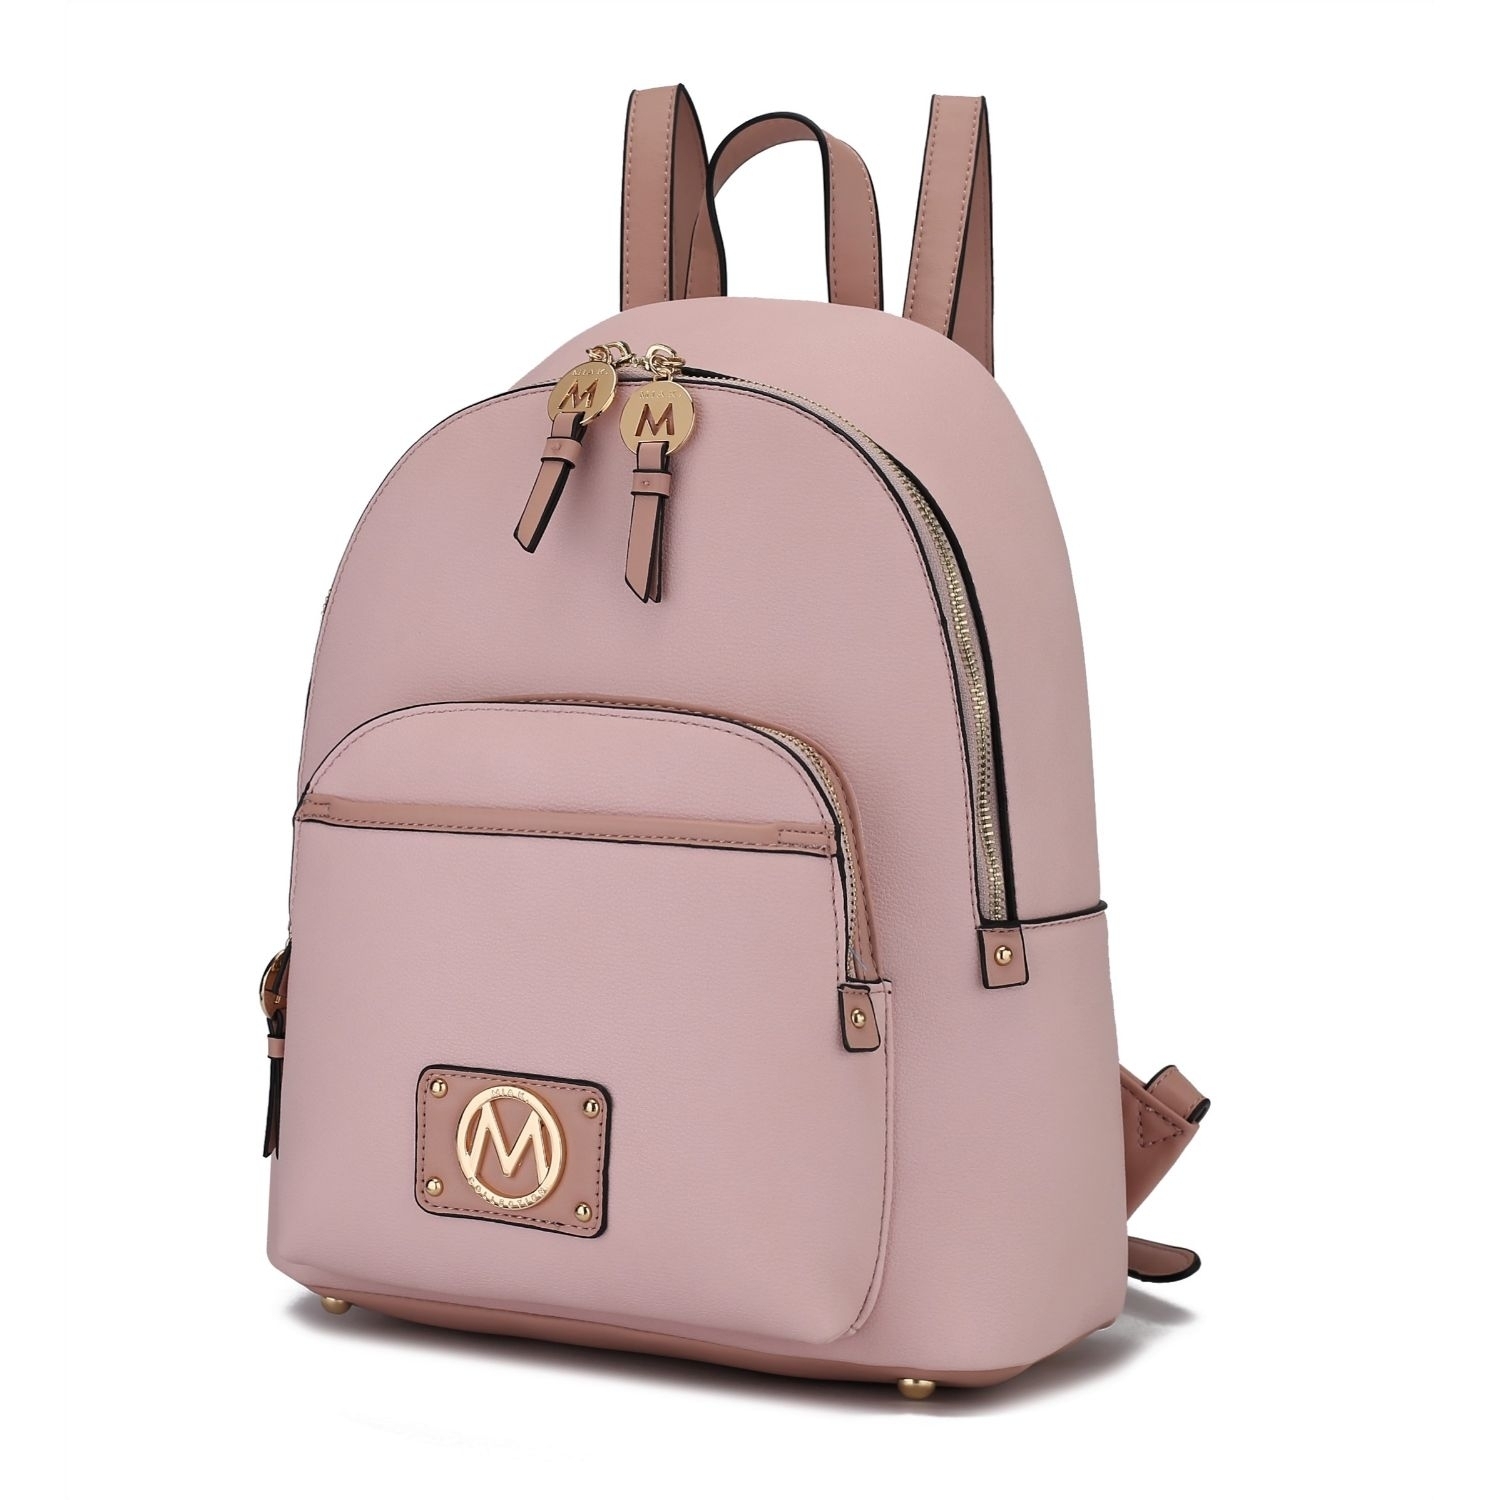 MKF Collection Alice Backpack By Mia K. - Chocolate